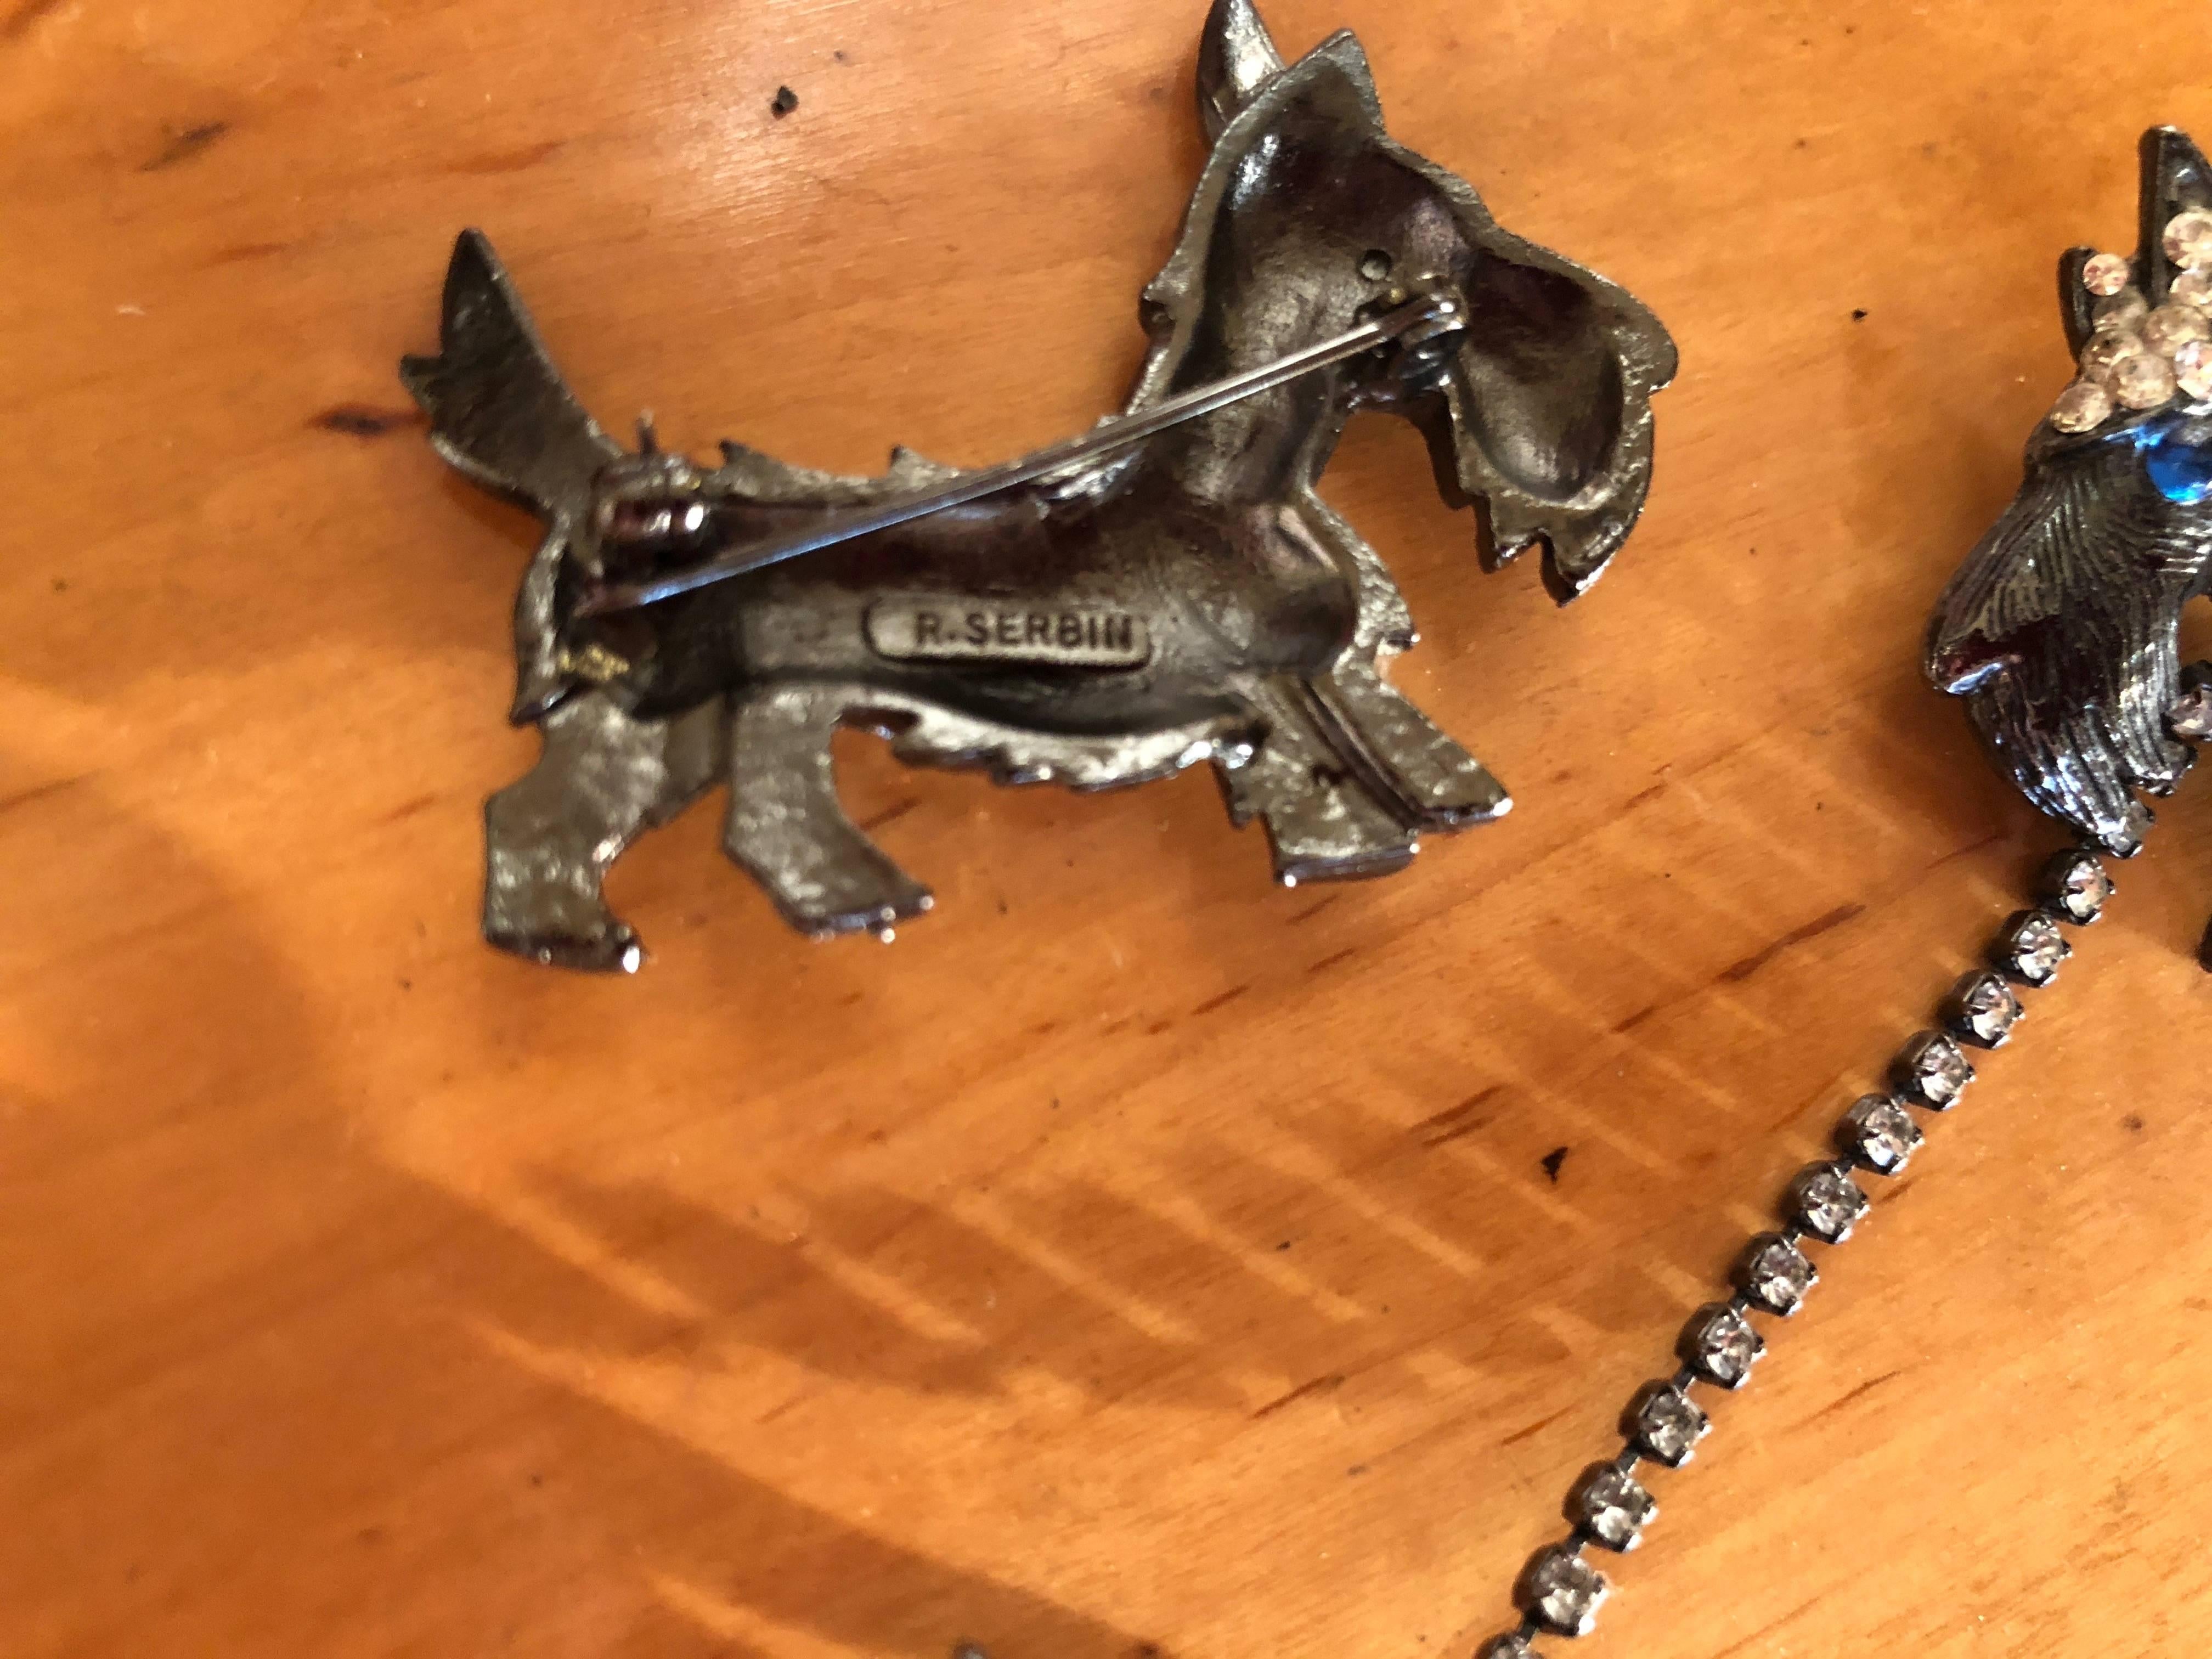 Scotty dog pins in gunmetal and crystal by R.  Serbin 1983.
Two doggies are attached by a rhinestone leash, while the other walsk solo.